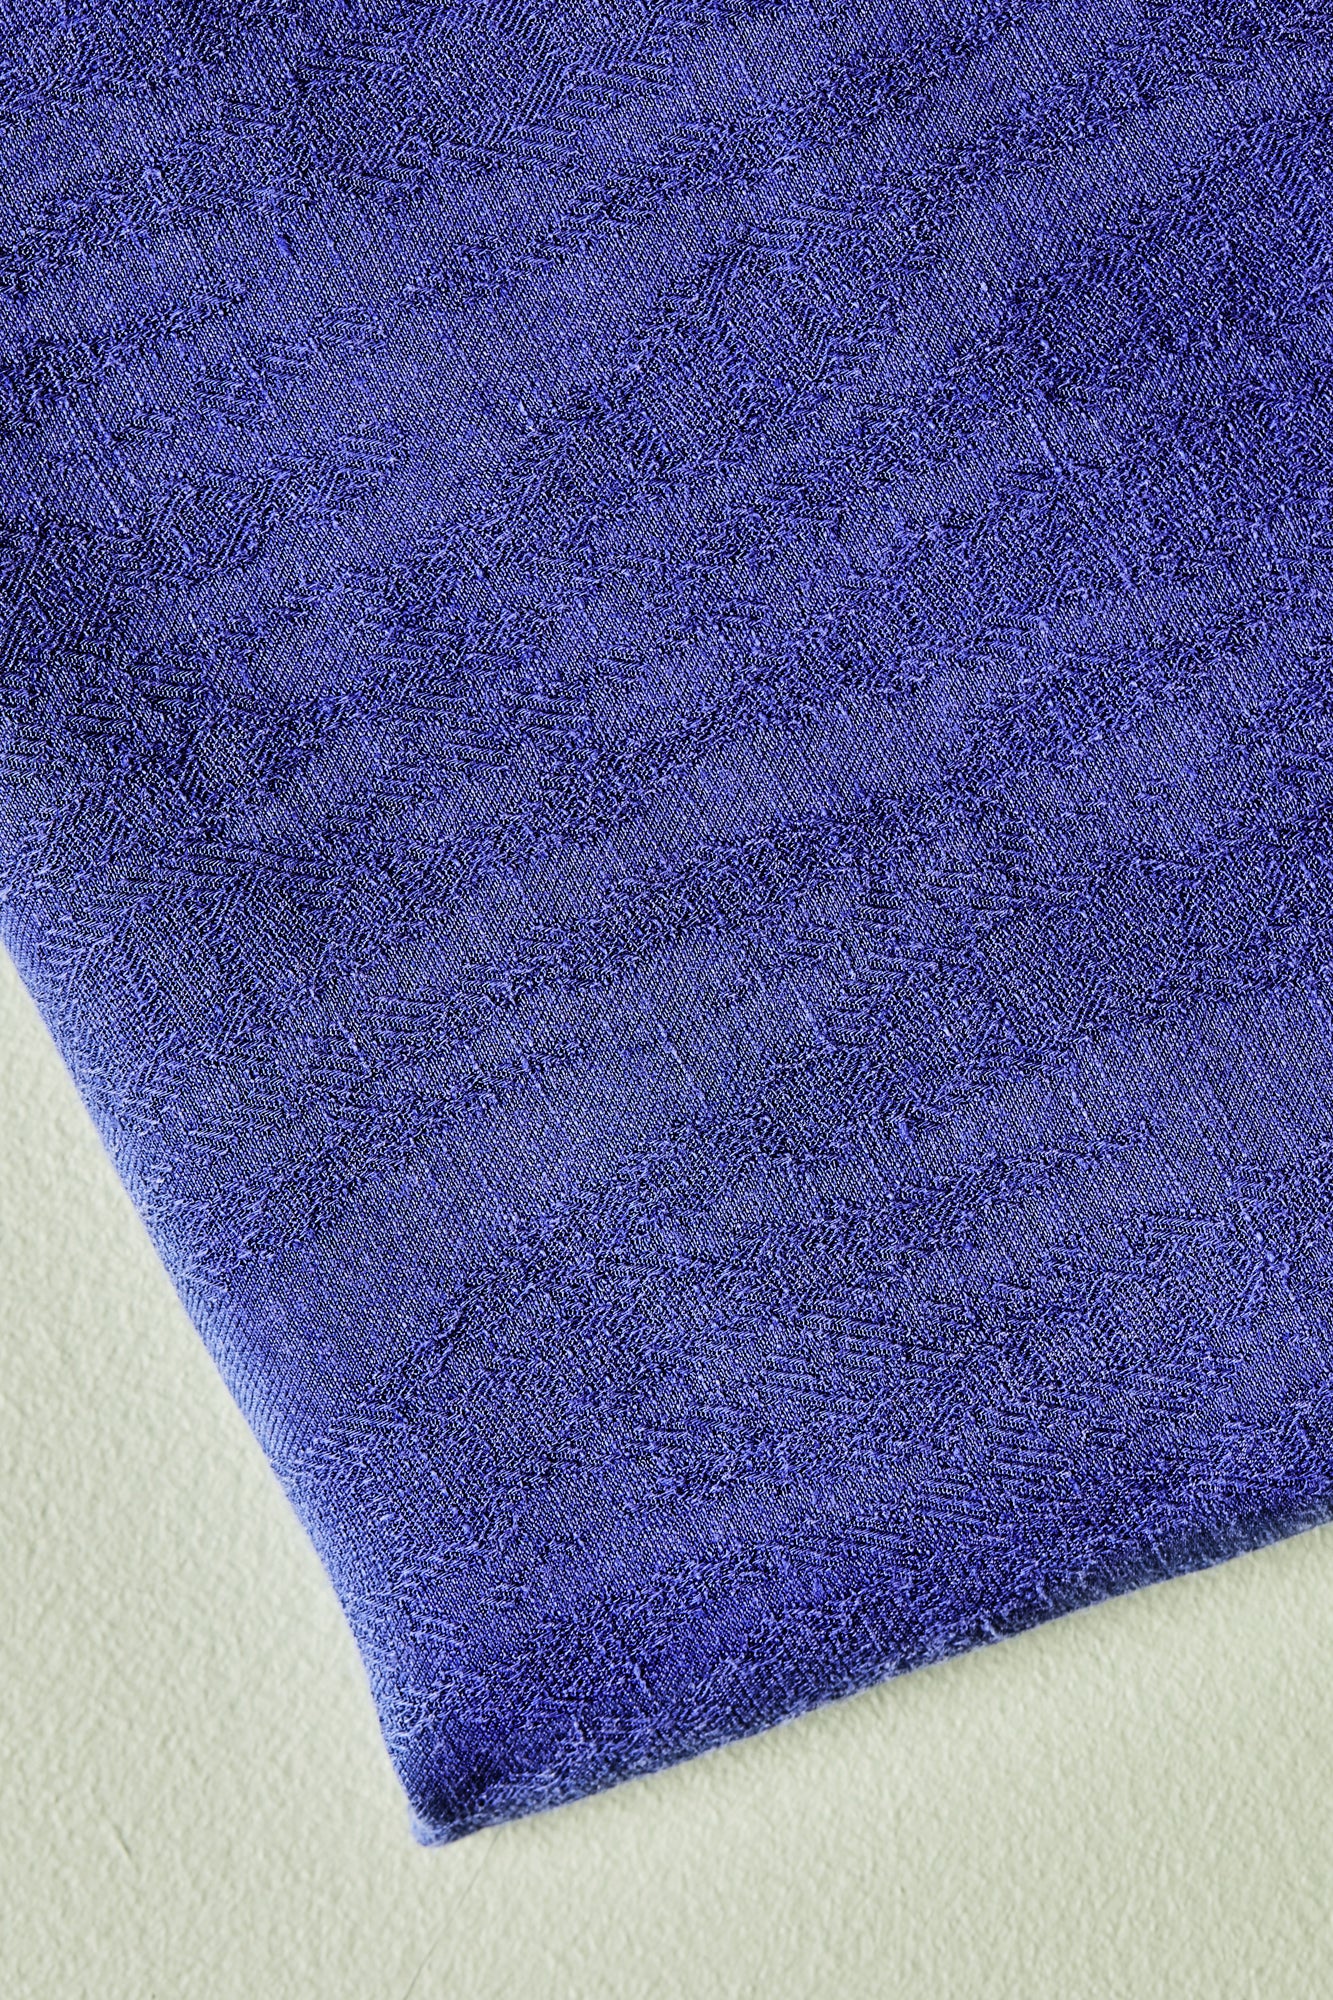 Close up for Hoya jacquard linen blend fabric in lapis